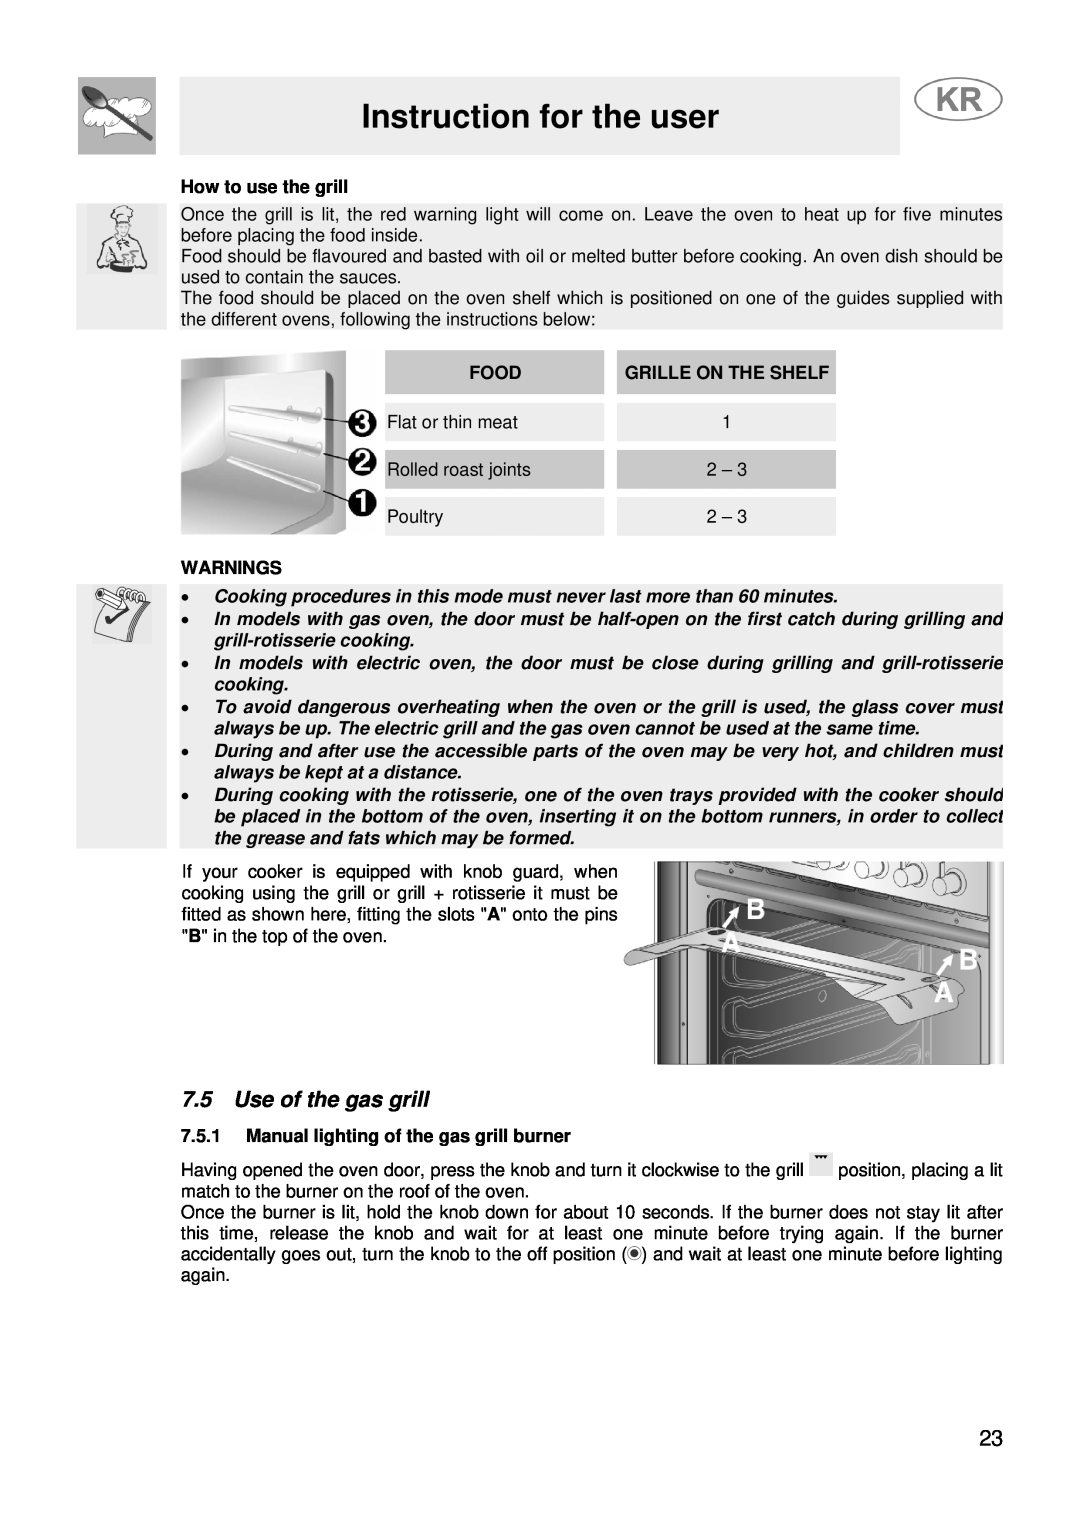 Smeg JGFC34SKB manual 7.5Use of the gas grill, Instruction for the user, How to use the grill, Food, Grille On The Shelf 